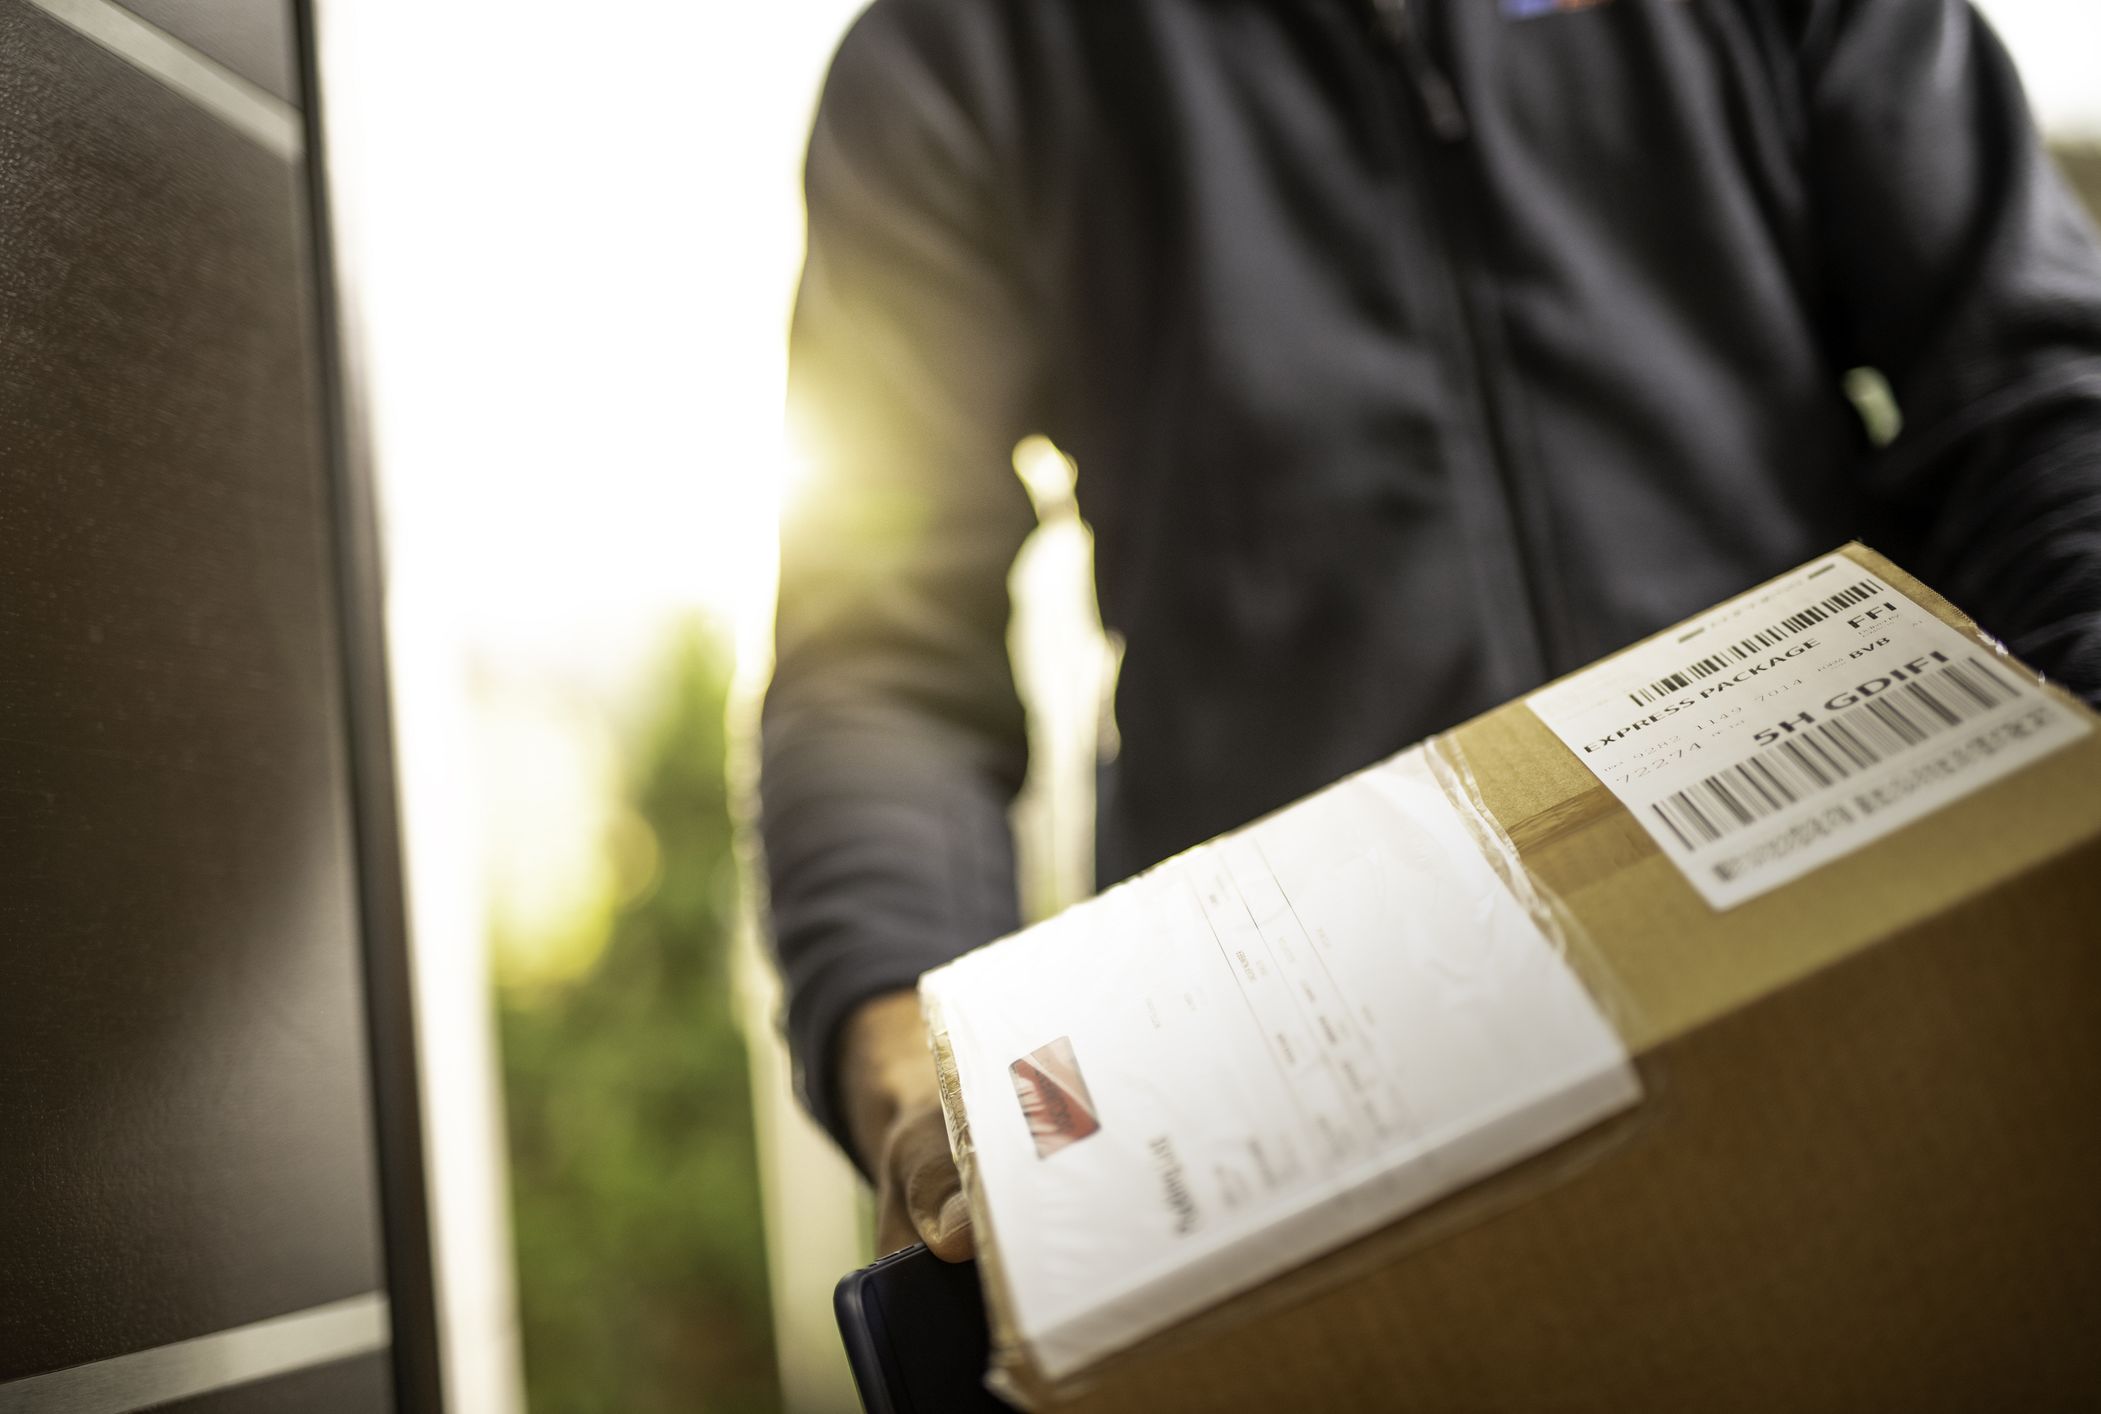 Mail Delivery Is Going to Be Slower and More Expensive This Holiday Season, So Here’s How to Plan Ahead